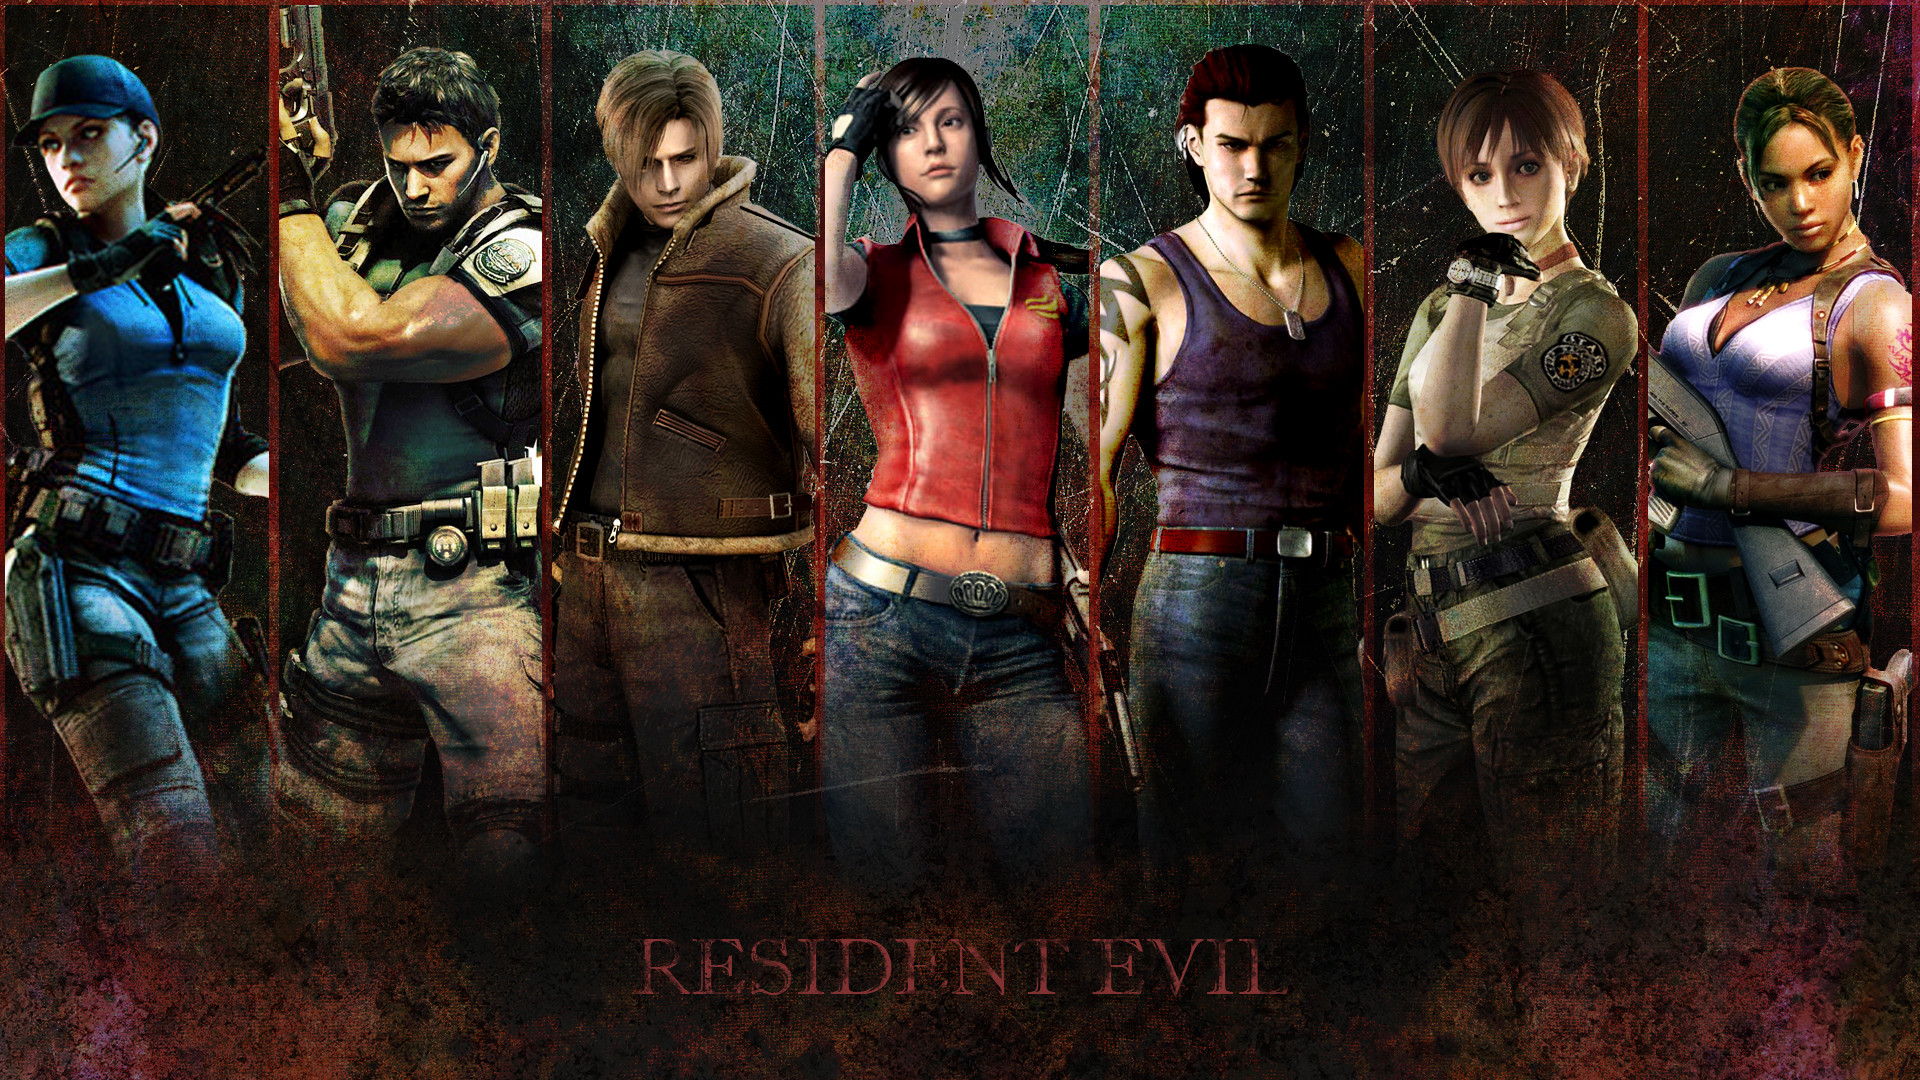 Resident evil wallpaper by volpavol customization wallpaper other 2012